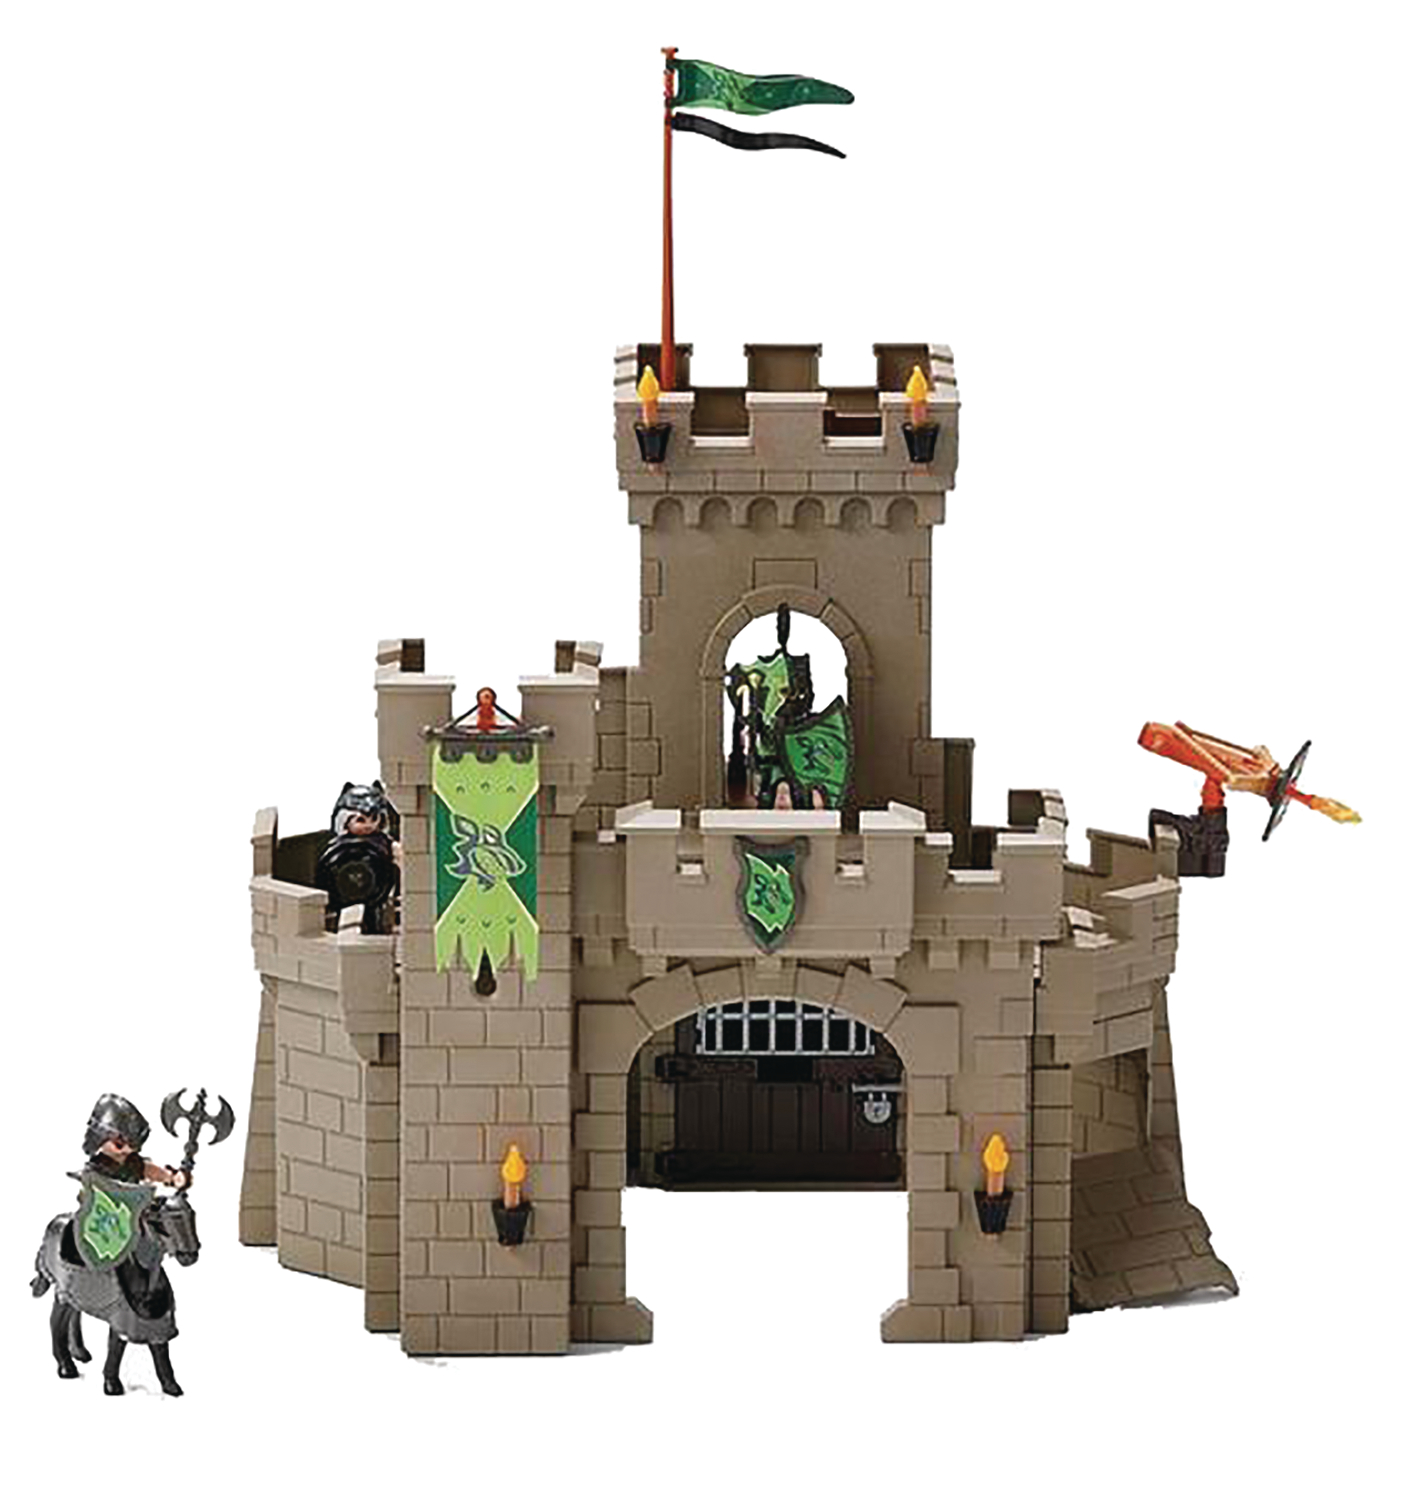 SEP178524 - WOLF KNIGHTS CASTLE PLAY-SET - Previews World